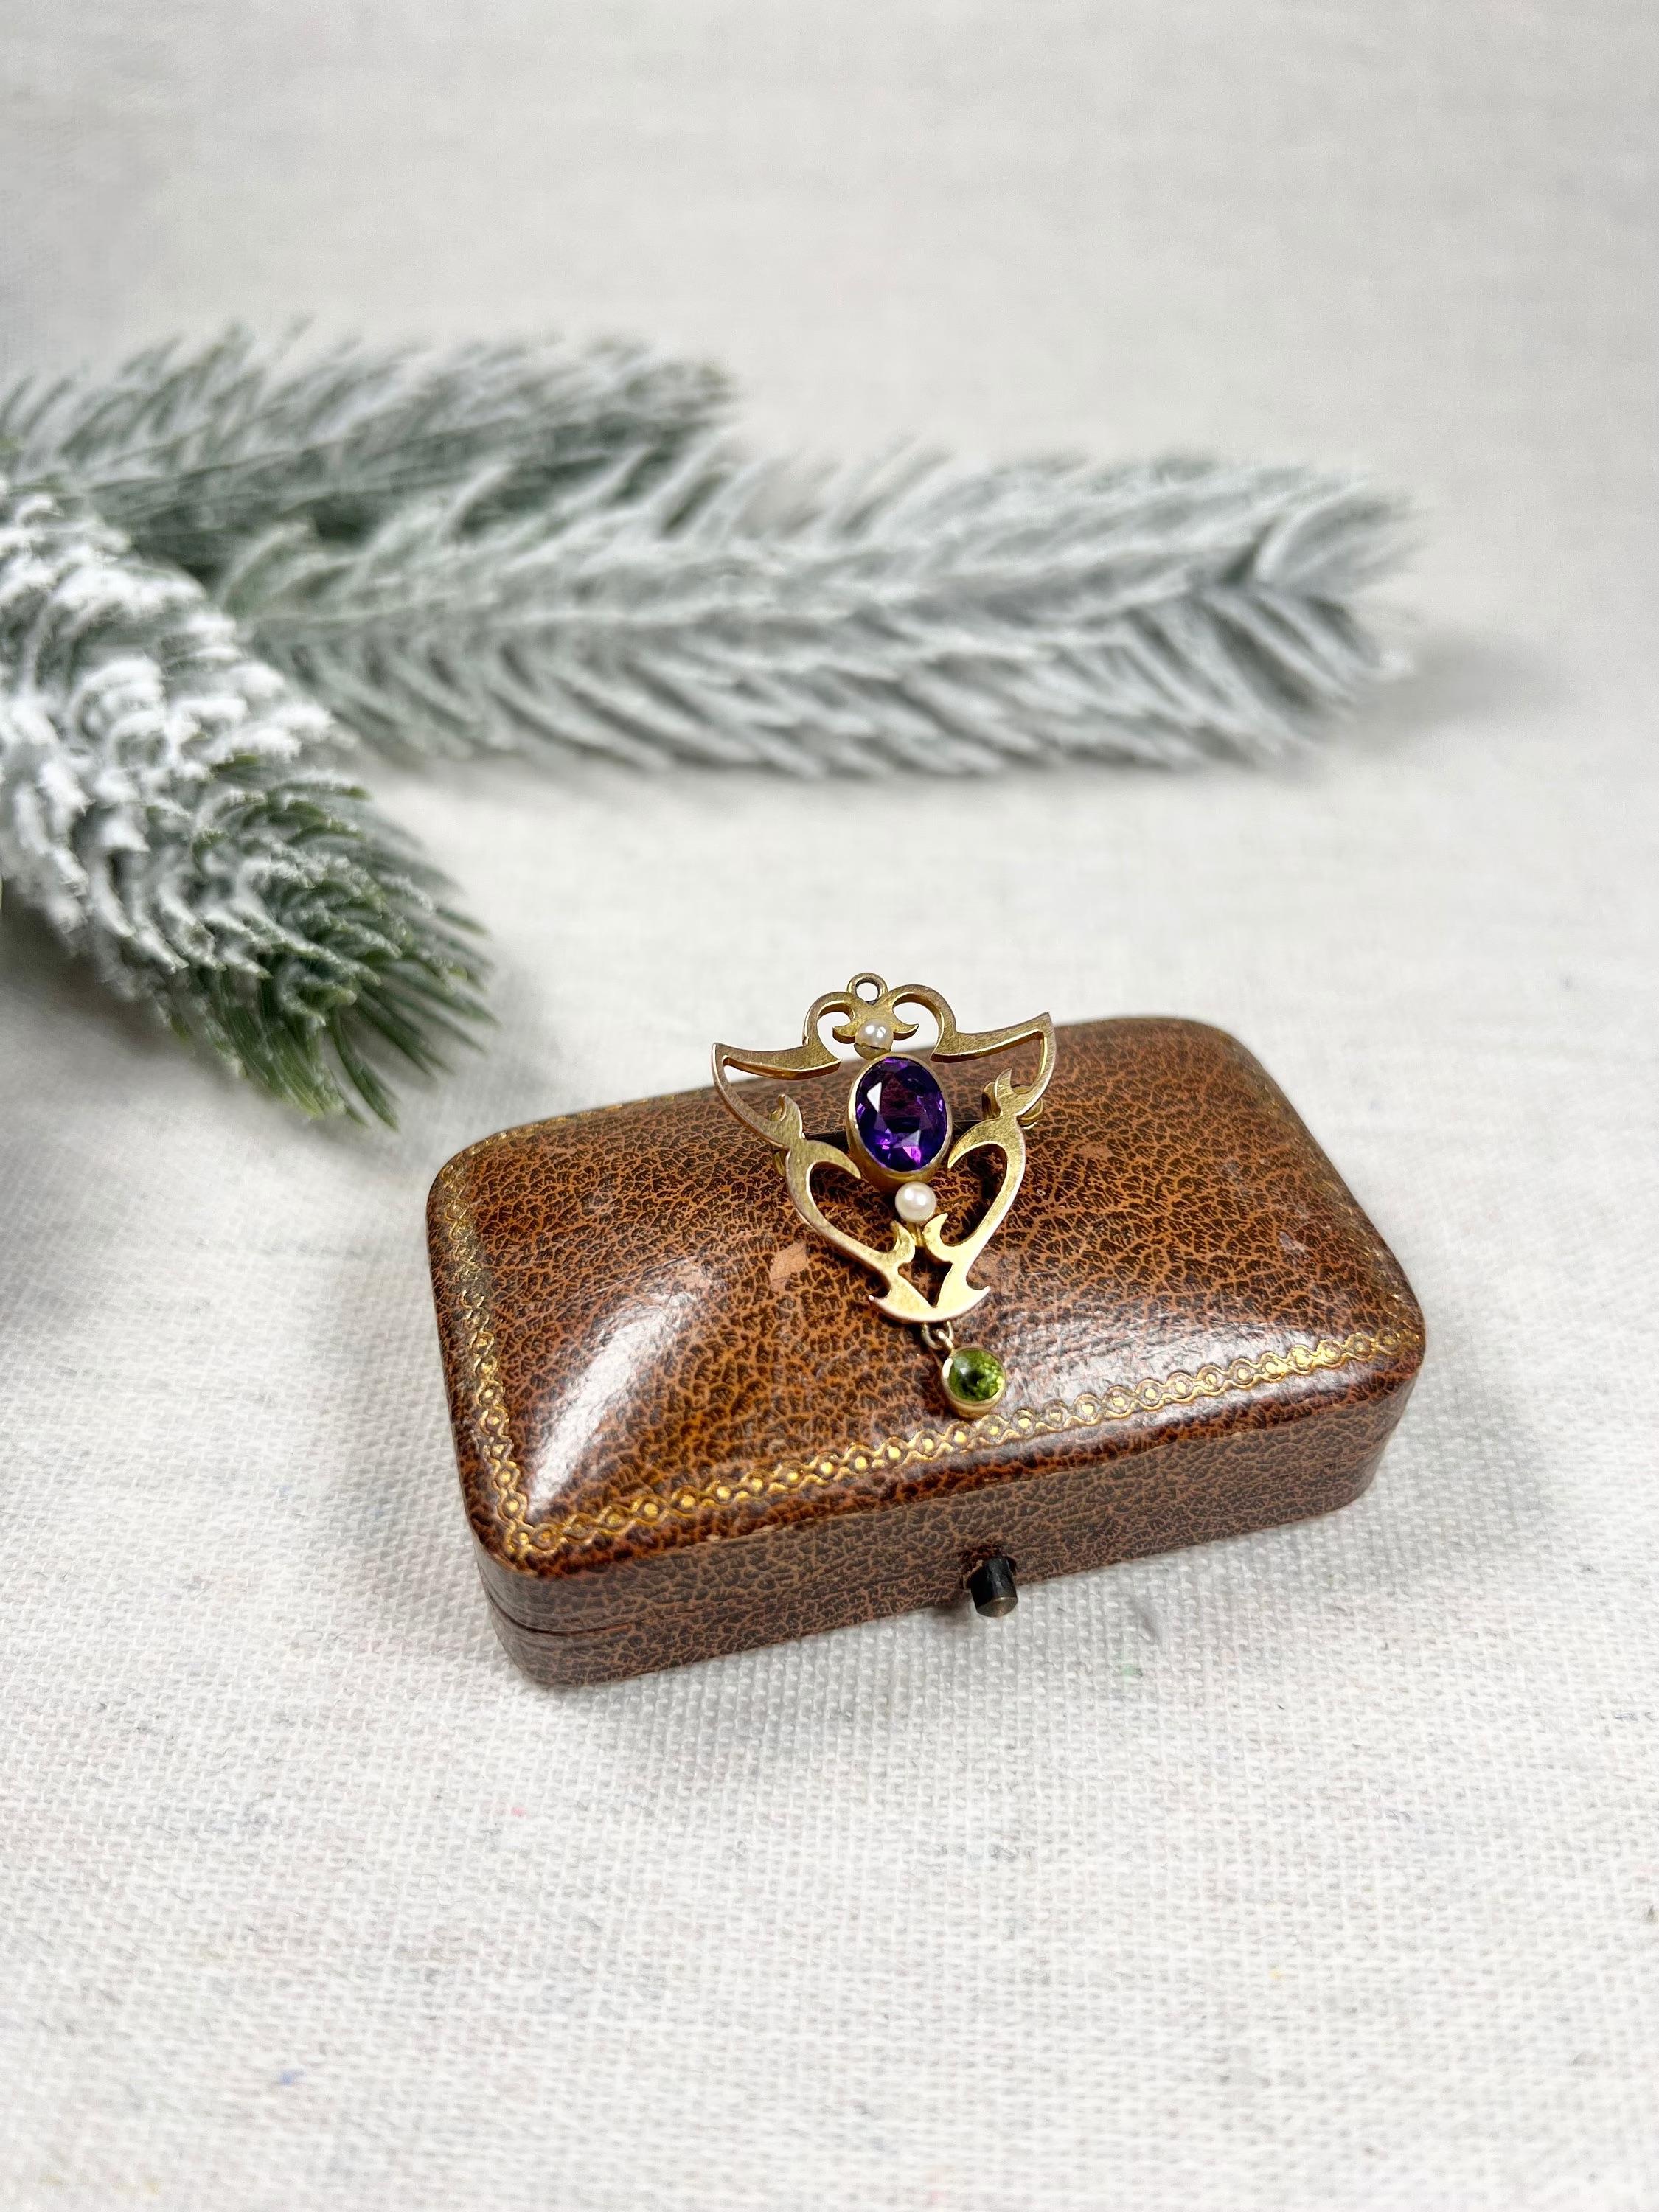 Antique 9ct Gold, Edwardian Amethyst, Pearl & Peridot Suffragette Pendant/Brooch For Sale 5